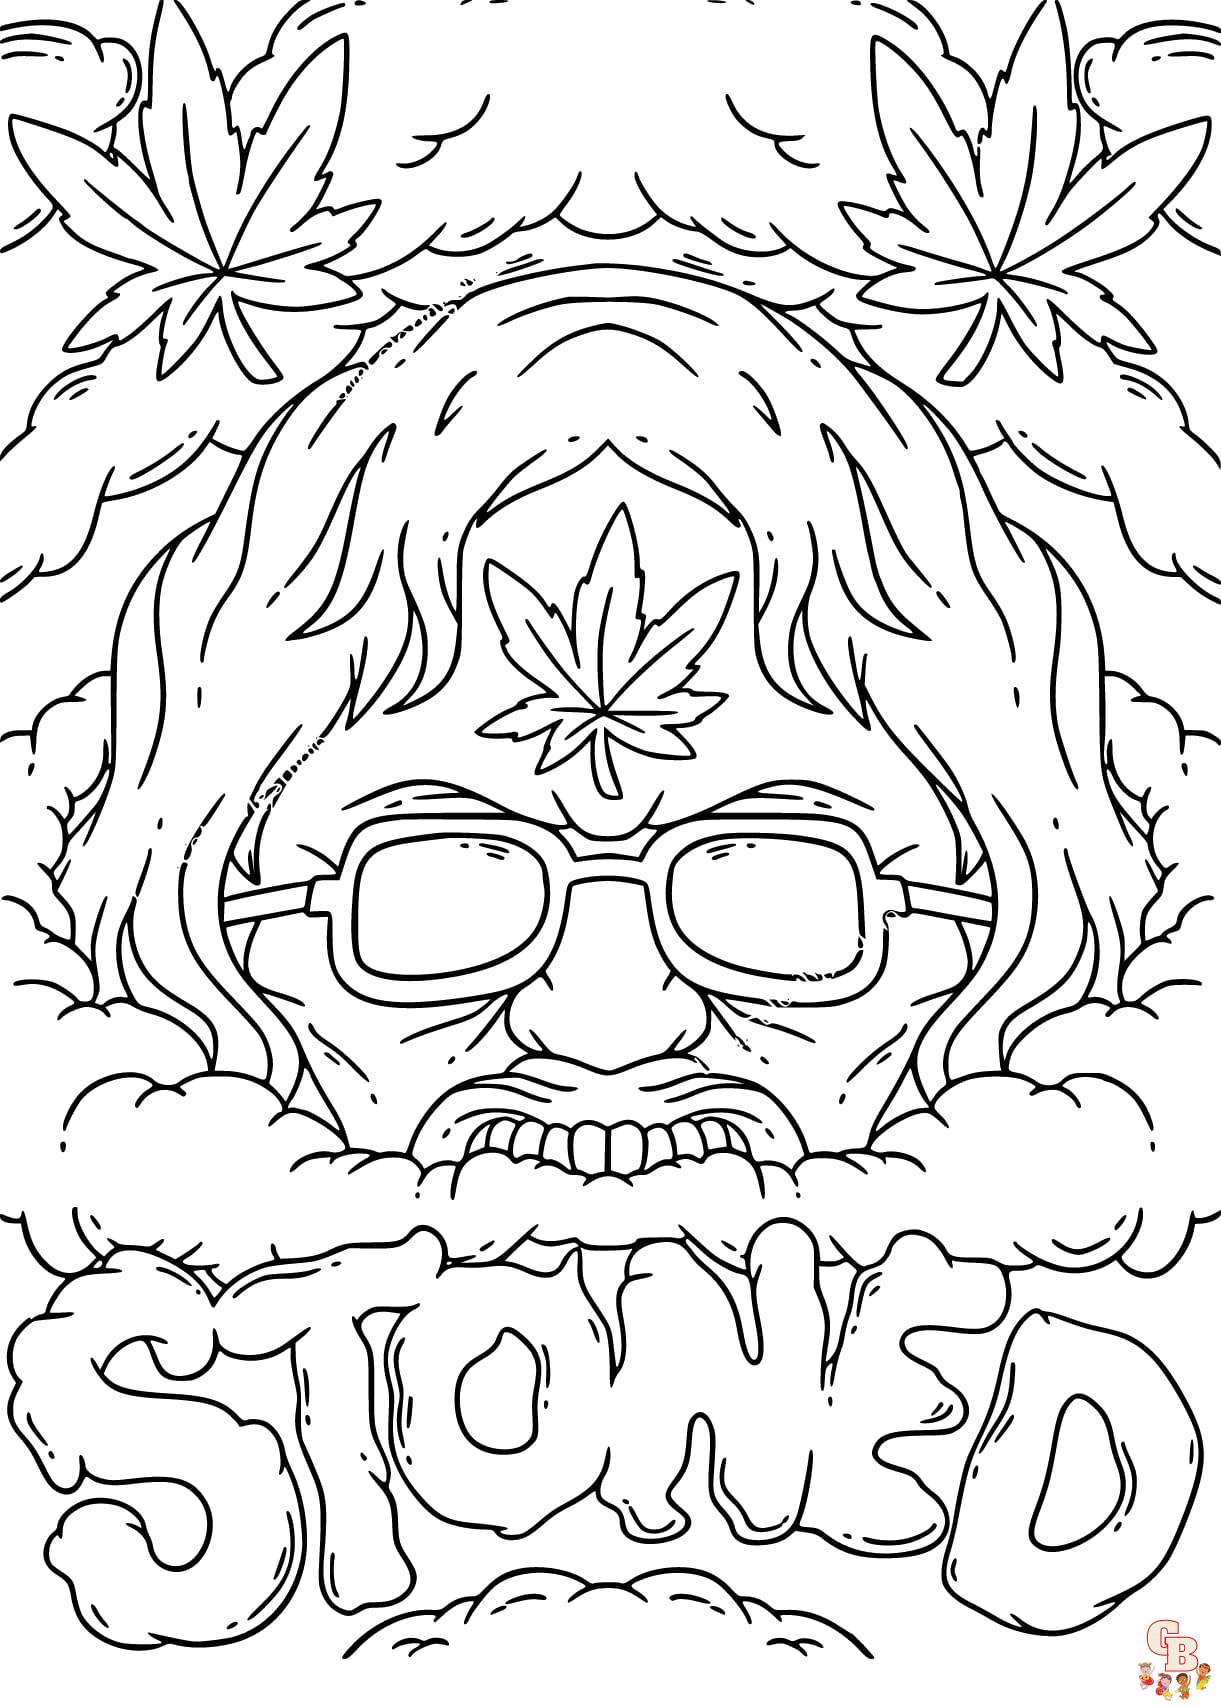 Stoner coloring pages printable free